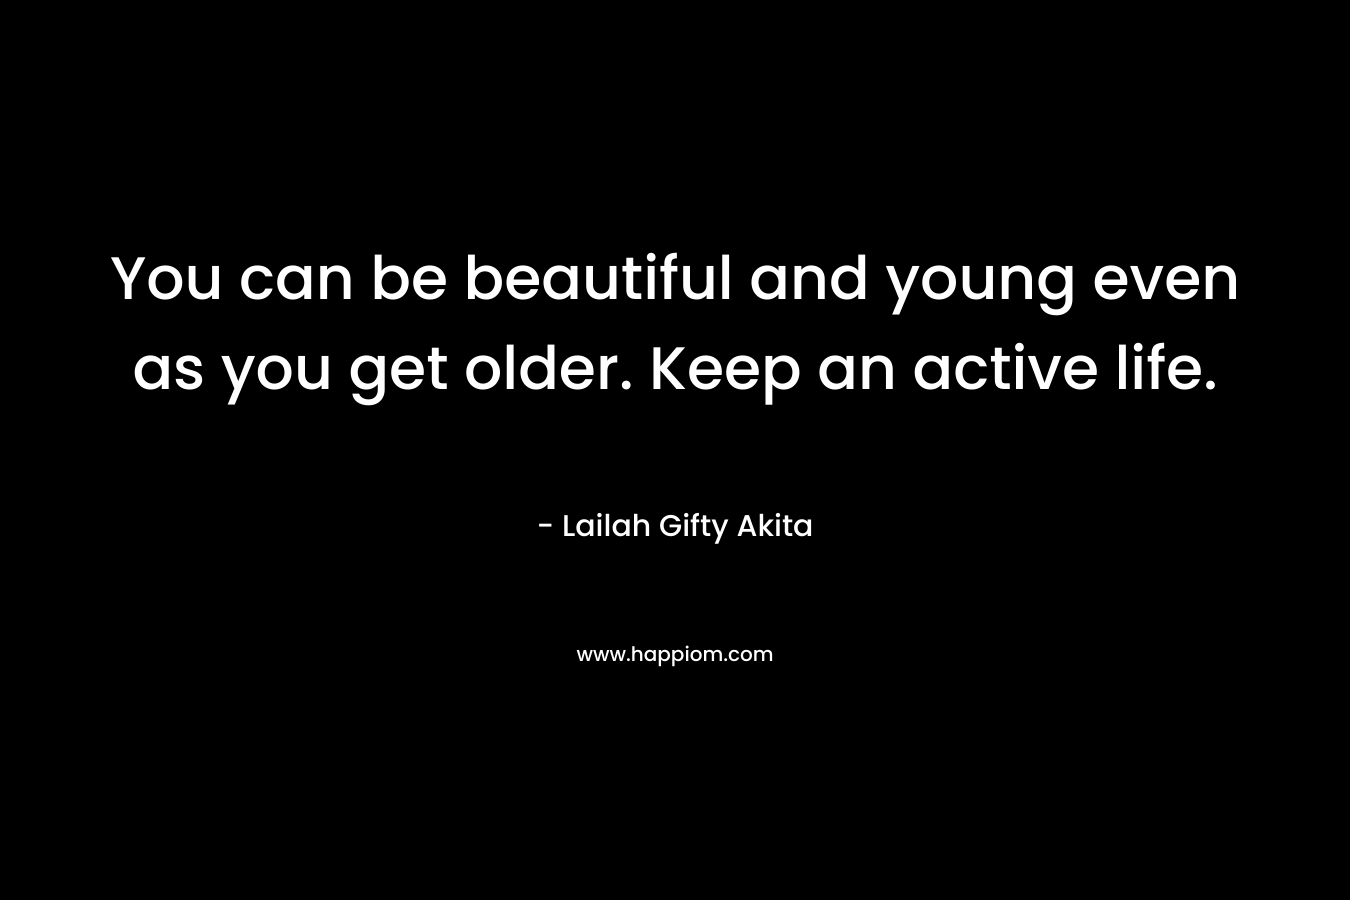 You can be beautiful and young even as you get older. Keep an active life.